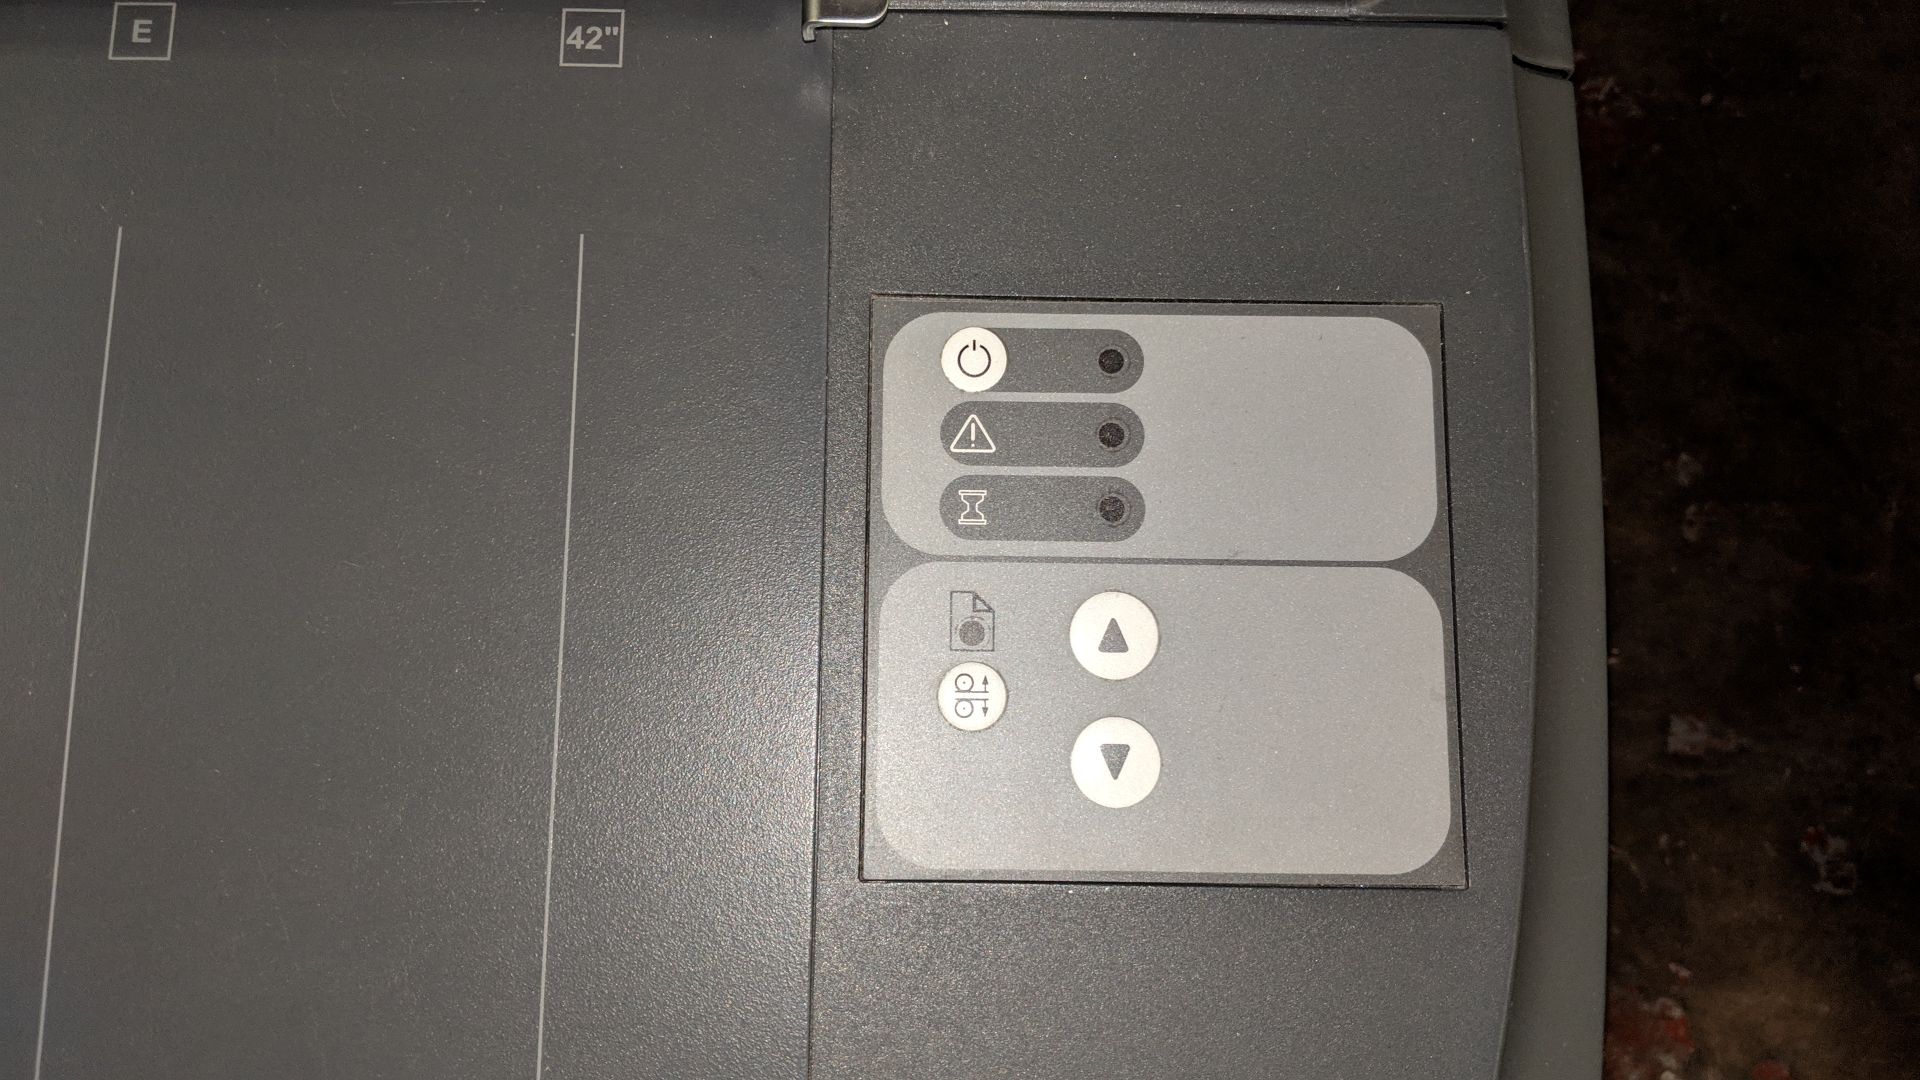 HP DesignJet scanner (820MFP) marked Contex GE67M on rear IMPORTANT: Please remember goods - Image 5 of 7